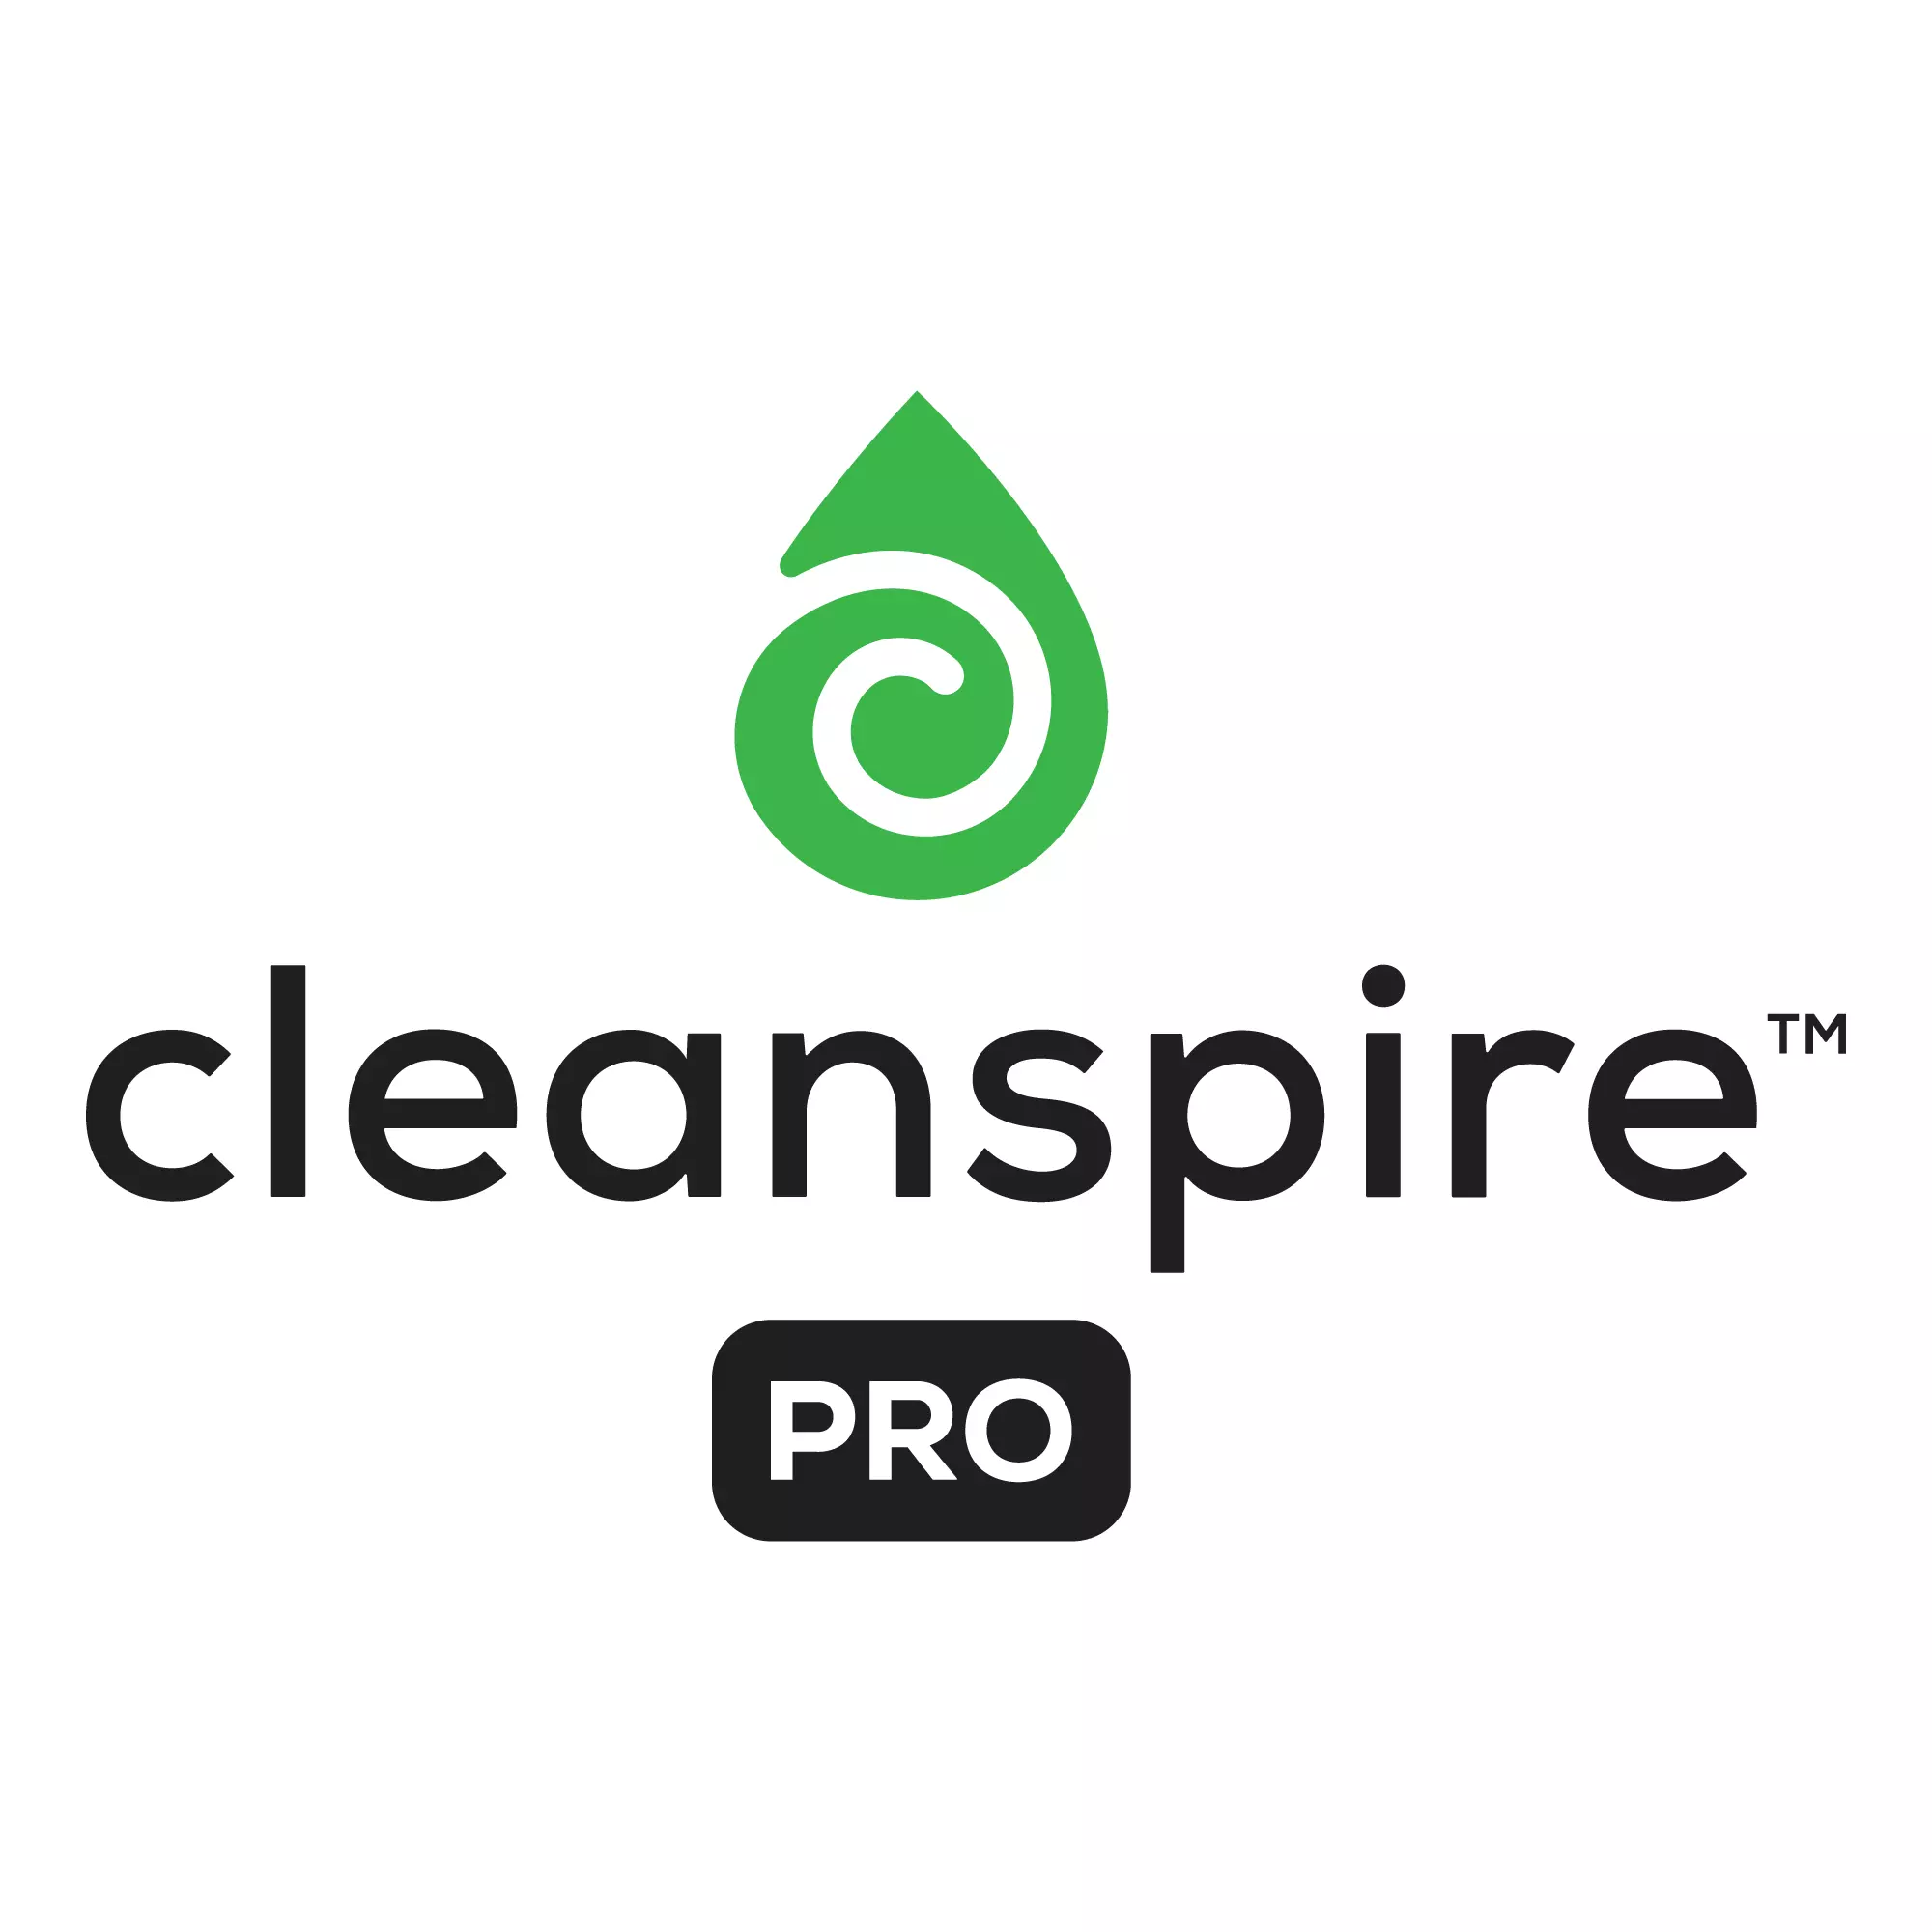 Cleanspire PRO